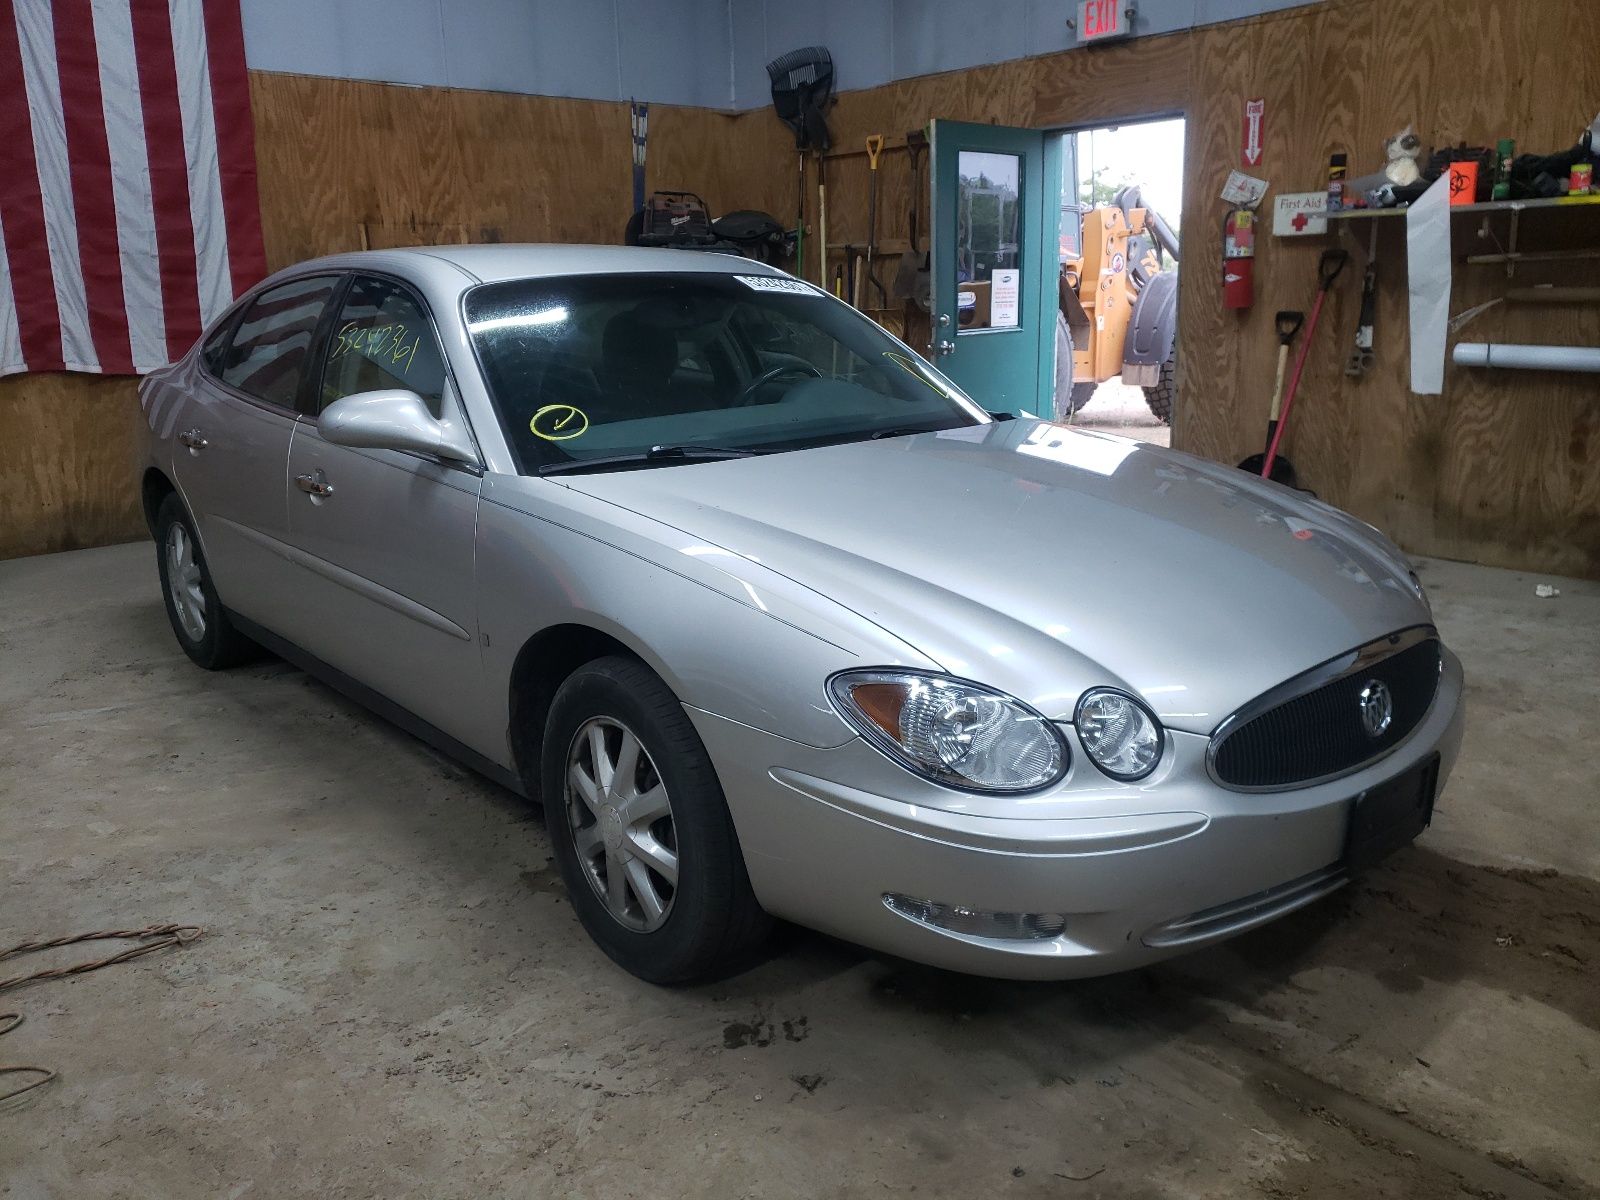 1 of 2G4WC582361173377 Buick 2006